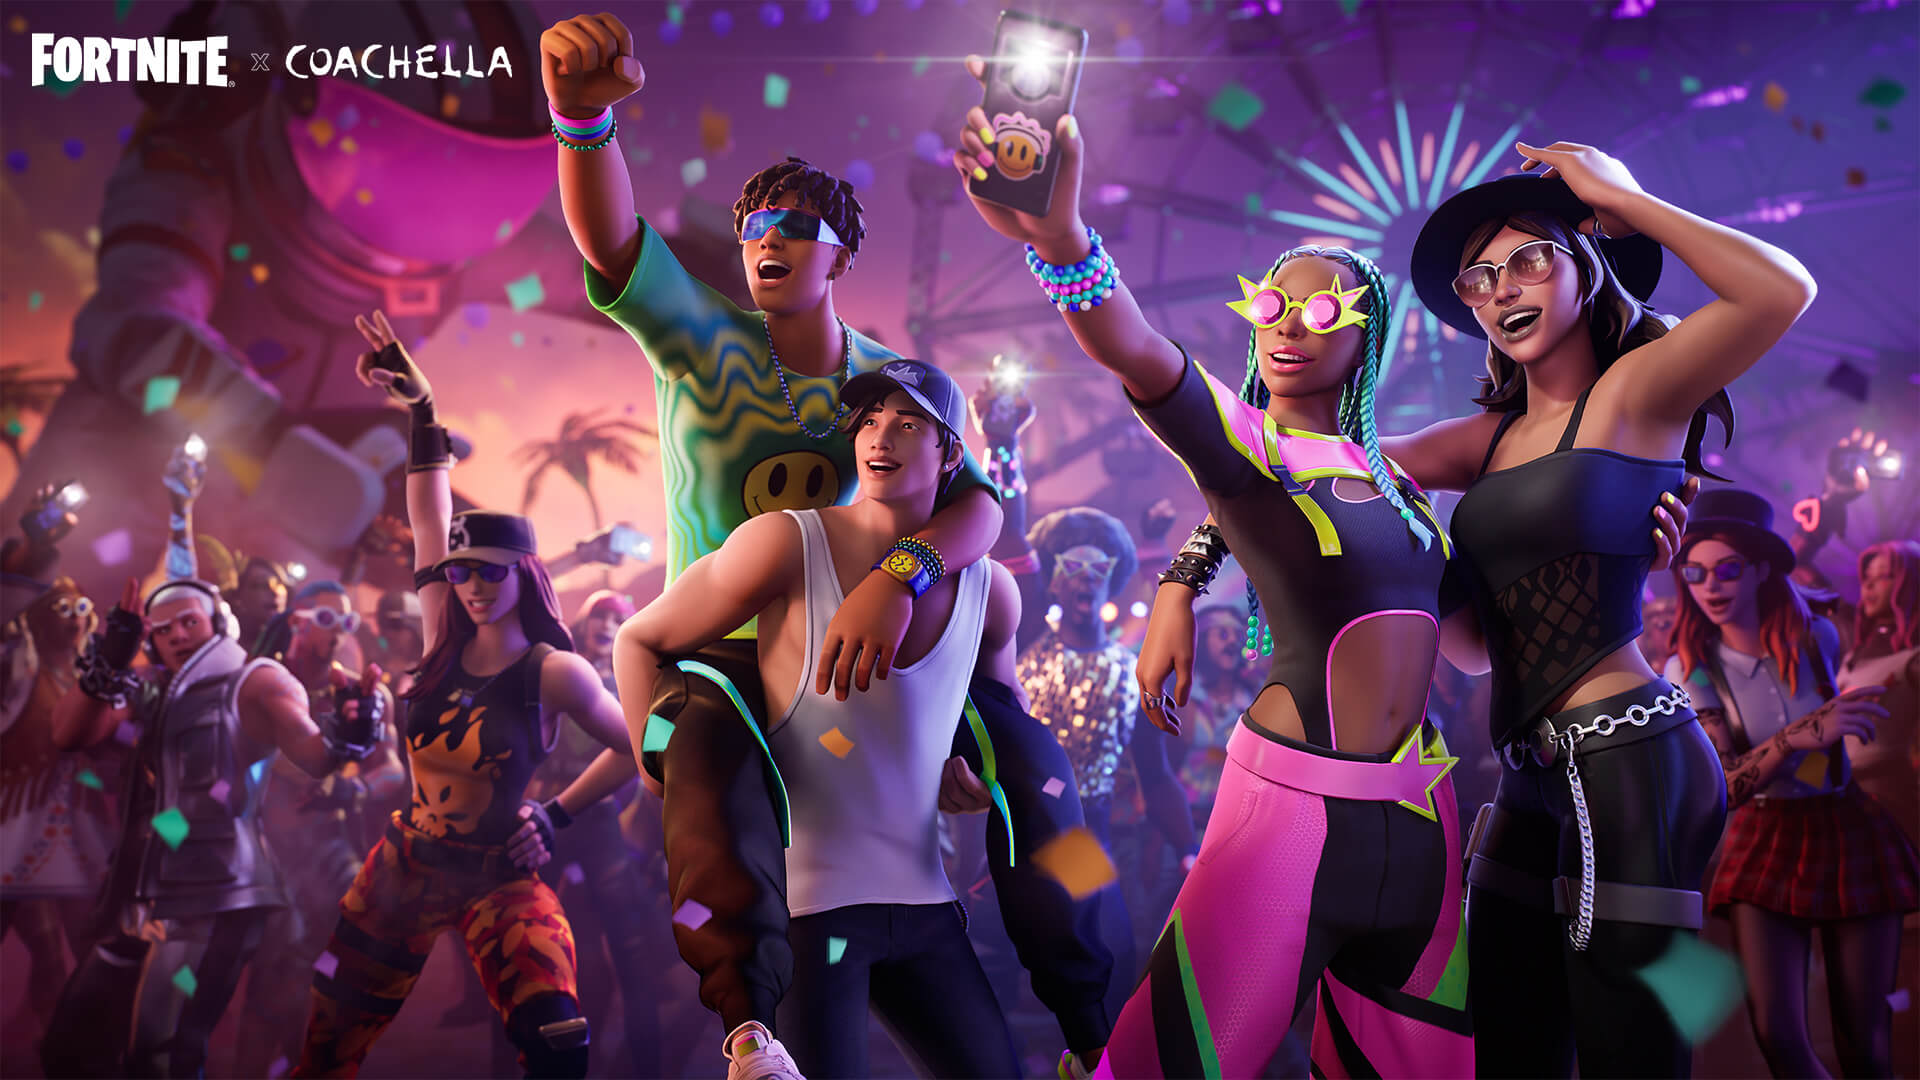 Fortnite Teaming With Coachella For Interactive Clothing/Music at Fest –  Billboard